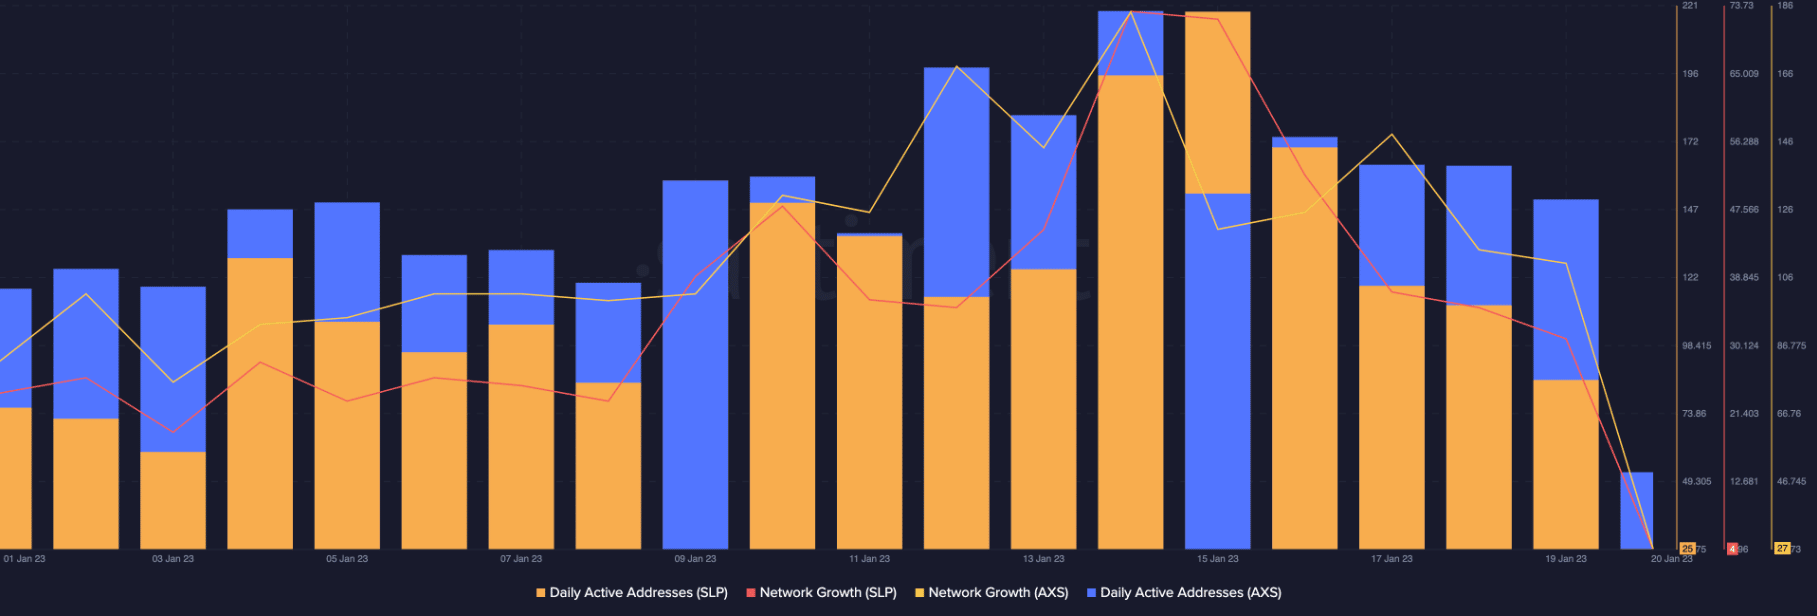 AXS price and Axie Infinity network growth